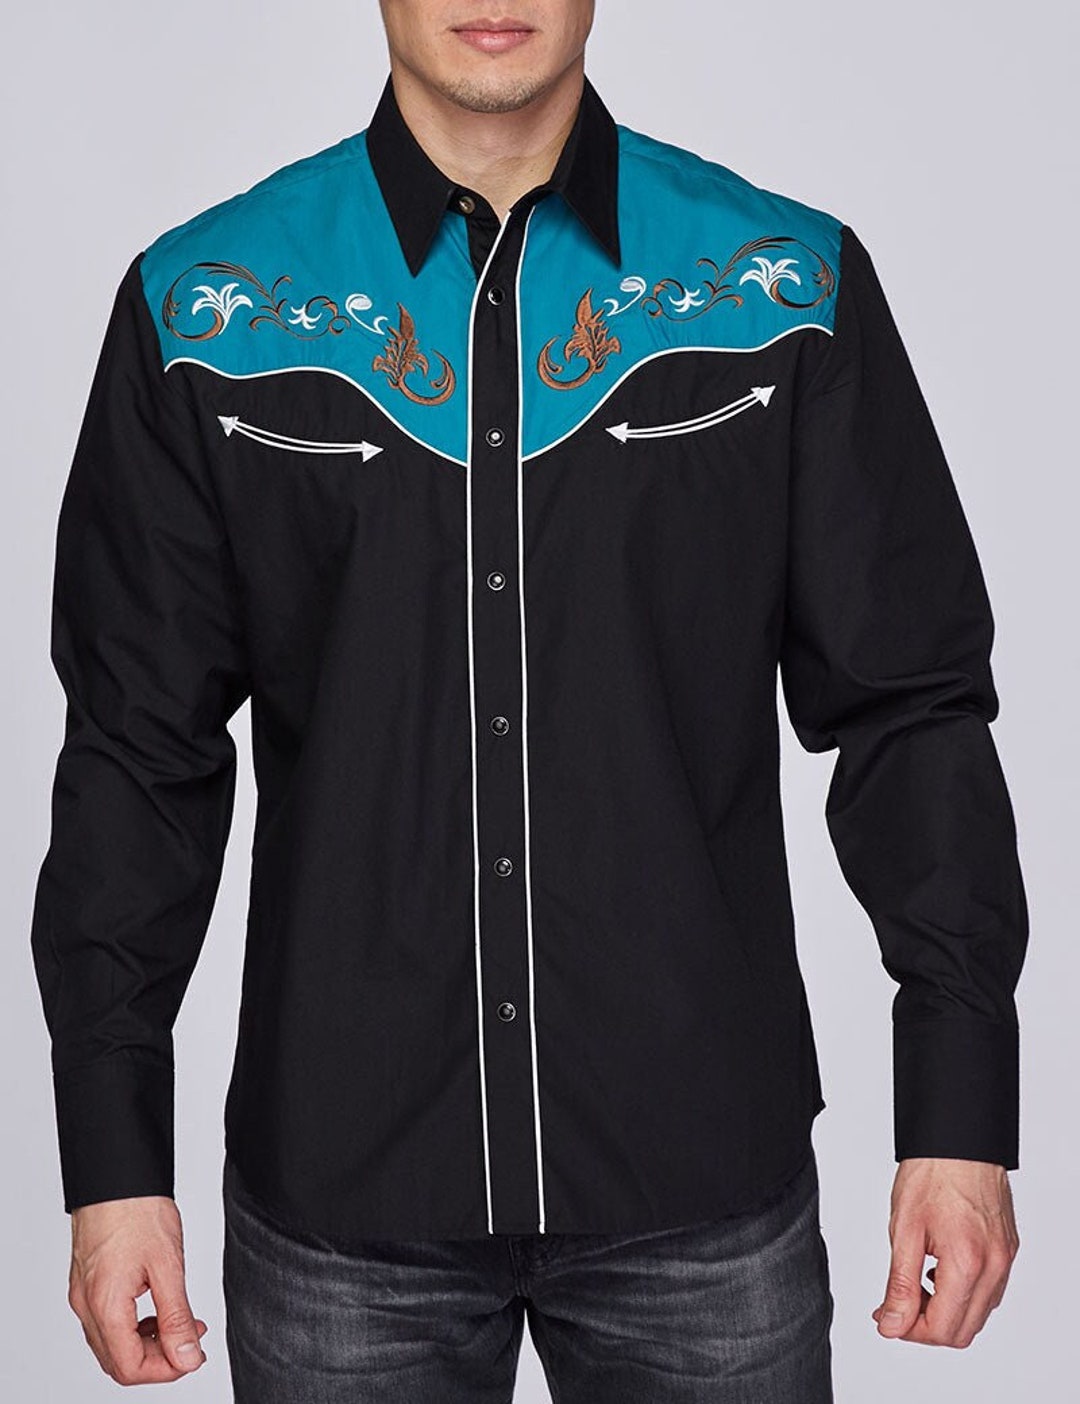 Rodeo Clothing Western Cowboy Dress Shirt With Embroidery for Outdoor ...